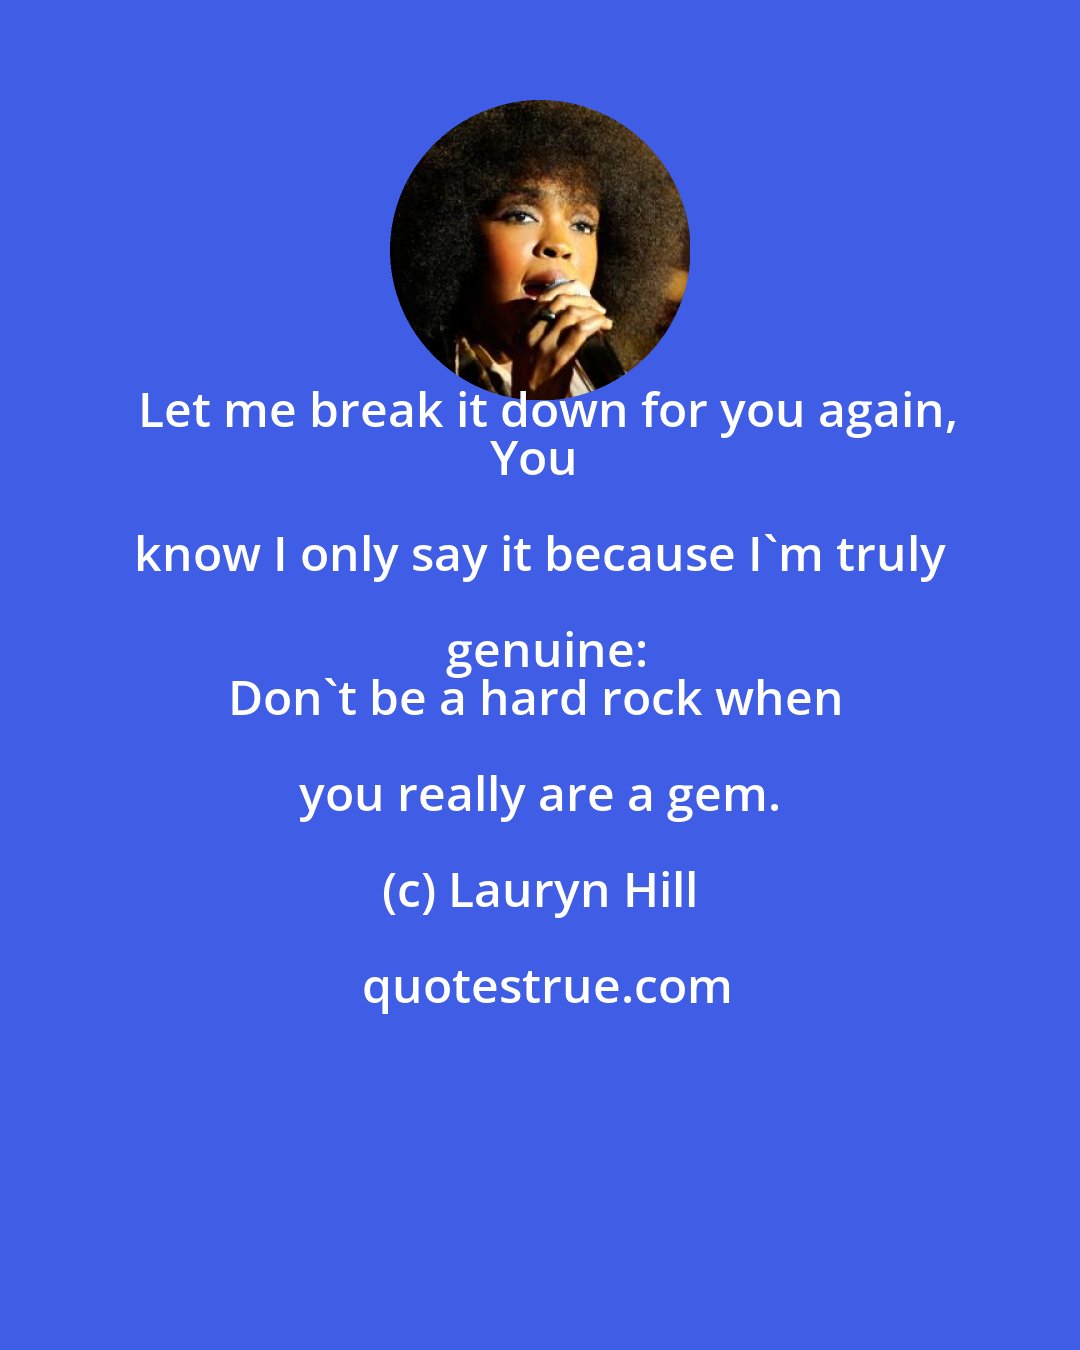 Lauryn Hill: Let me break it down for you again,
You know I only say it because I'm truly genuine:
Don't be a hard rock when you really are a gem.